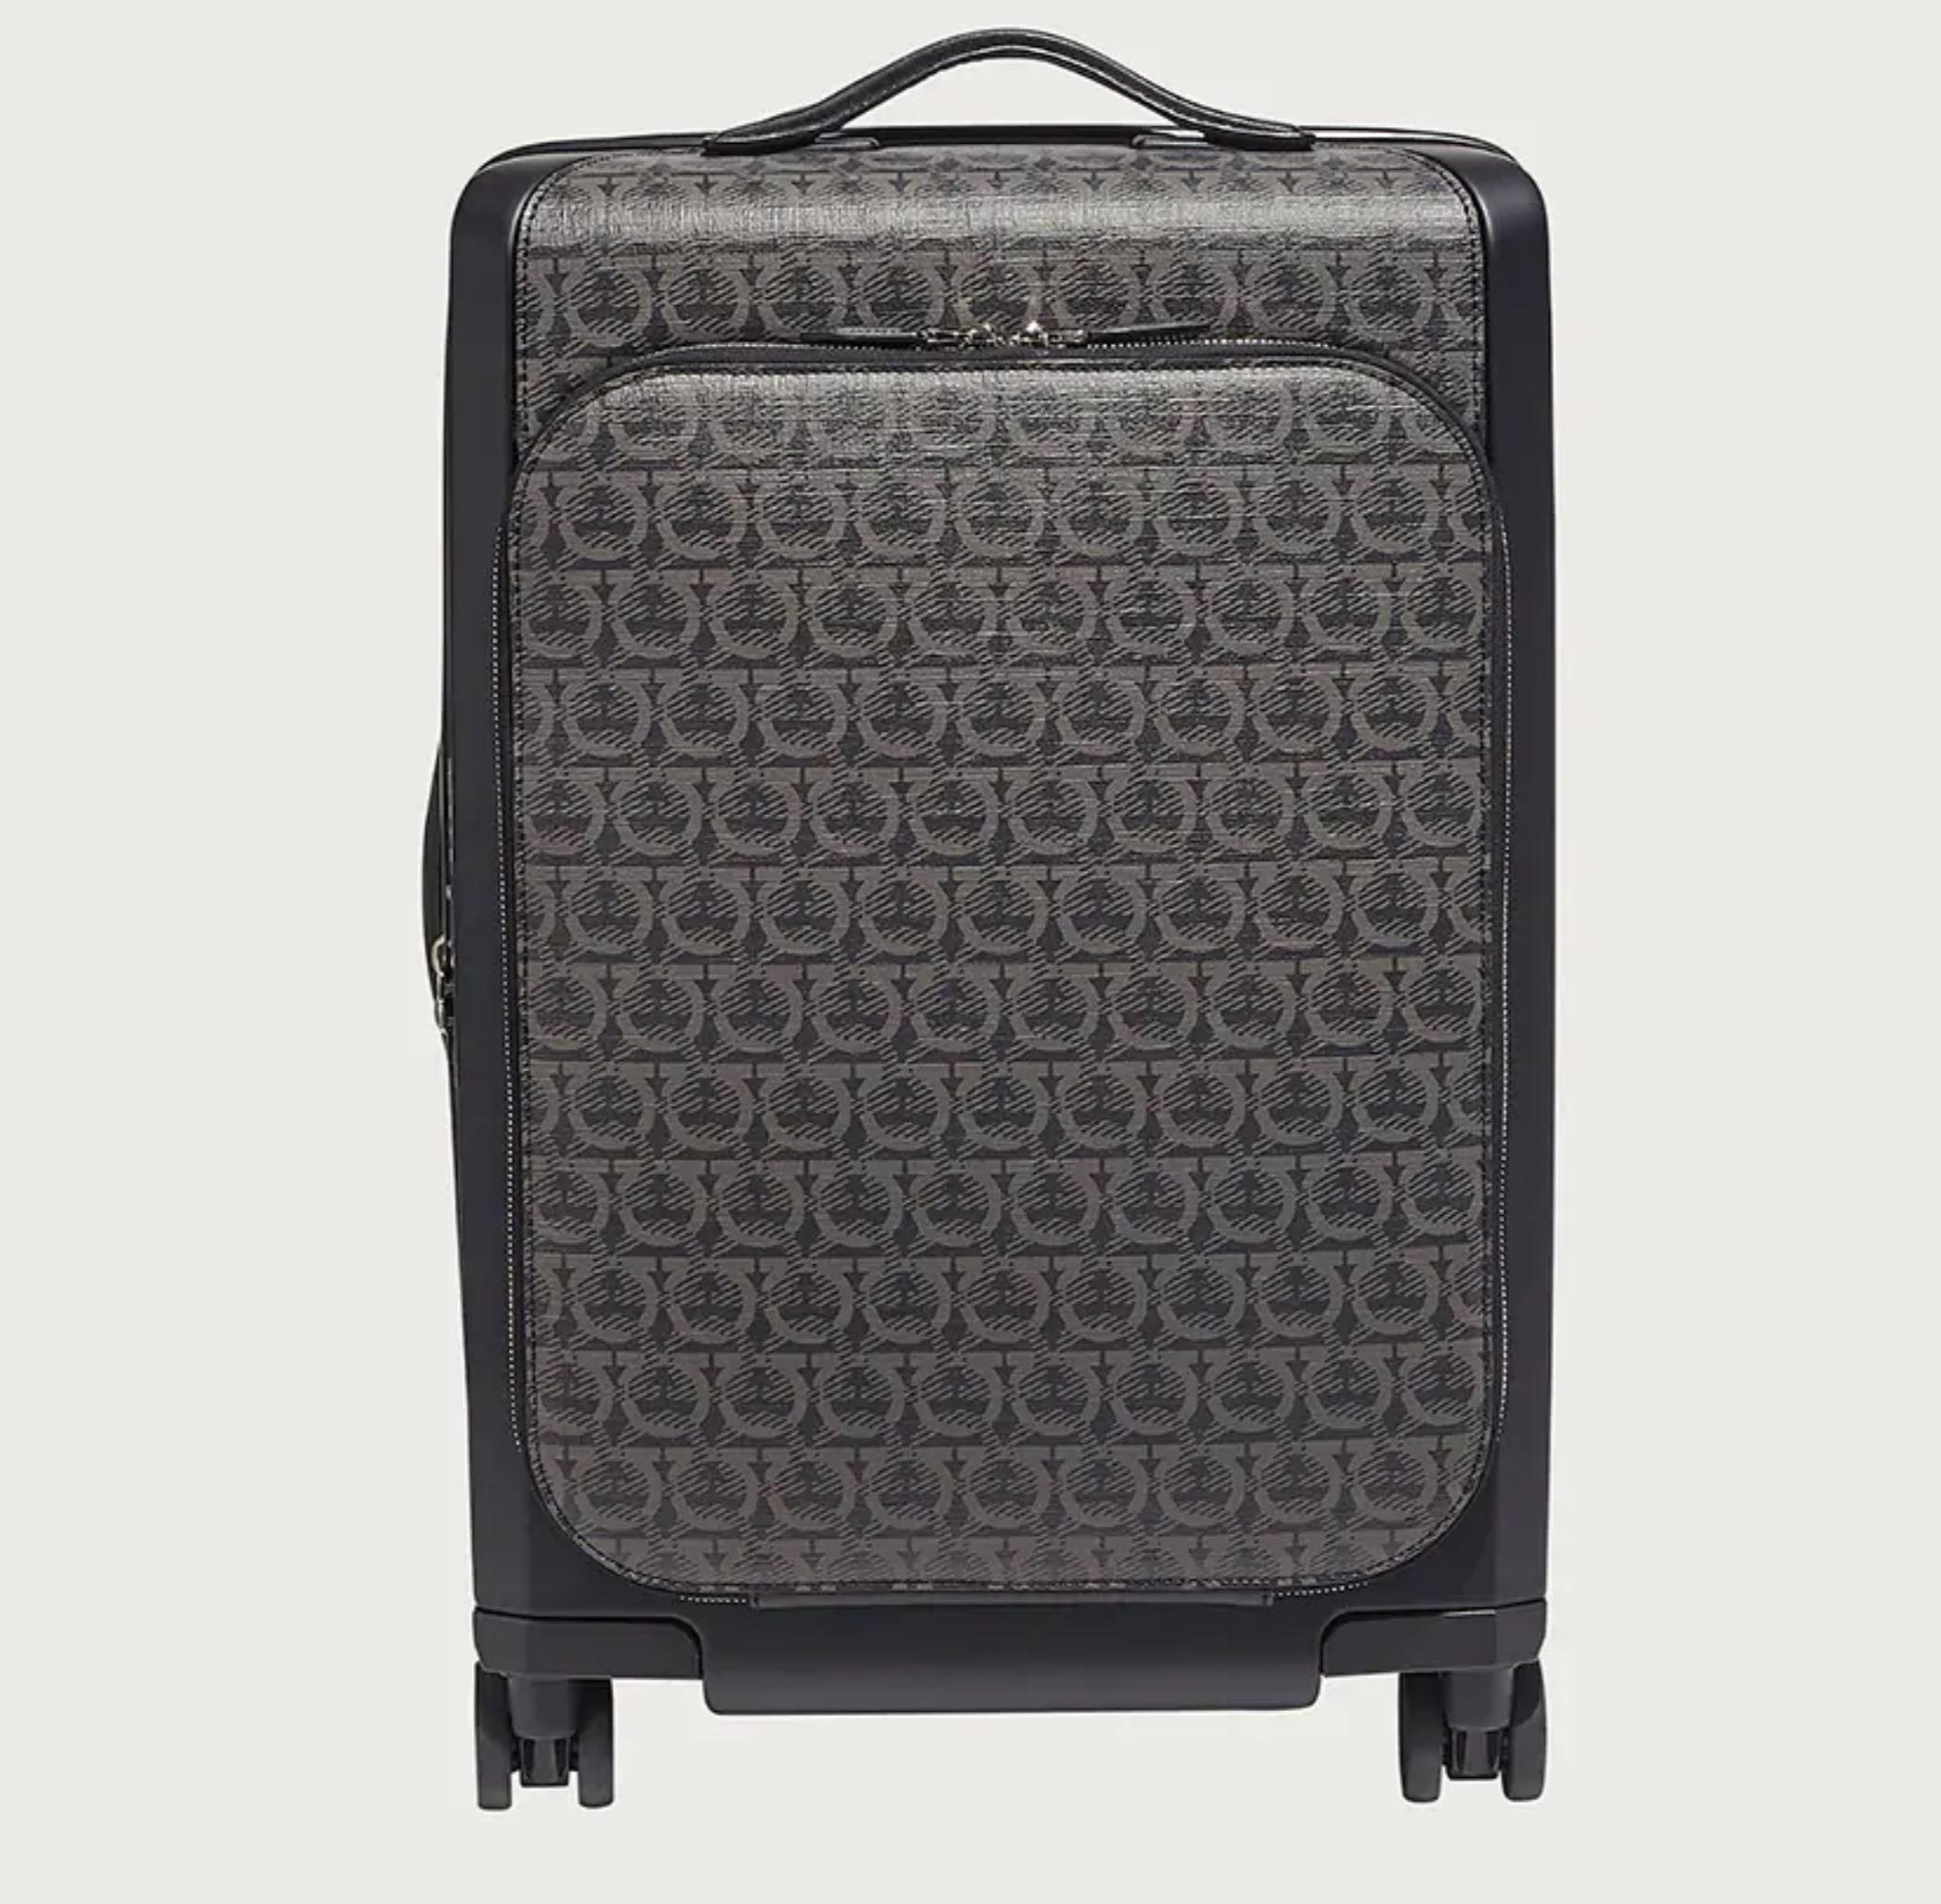 New With Tags Salvatore Ferragamo Carry On Trolley Suitcase $1990 2